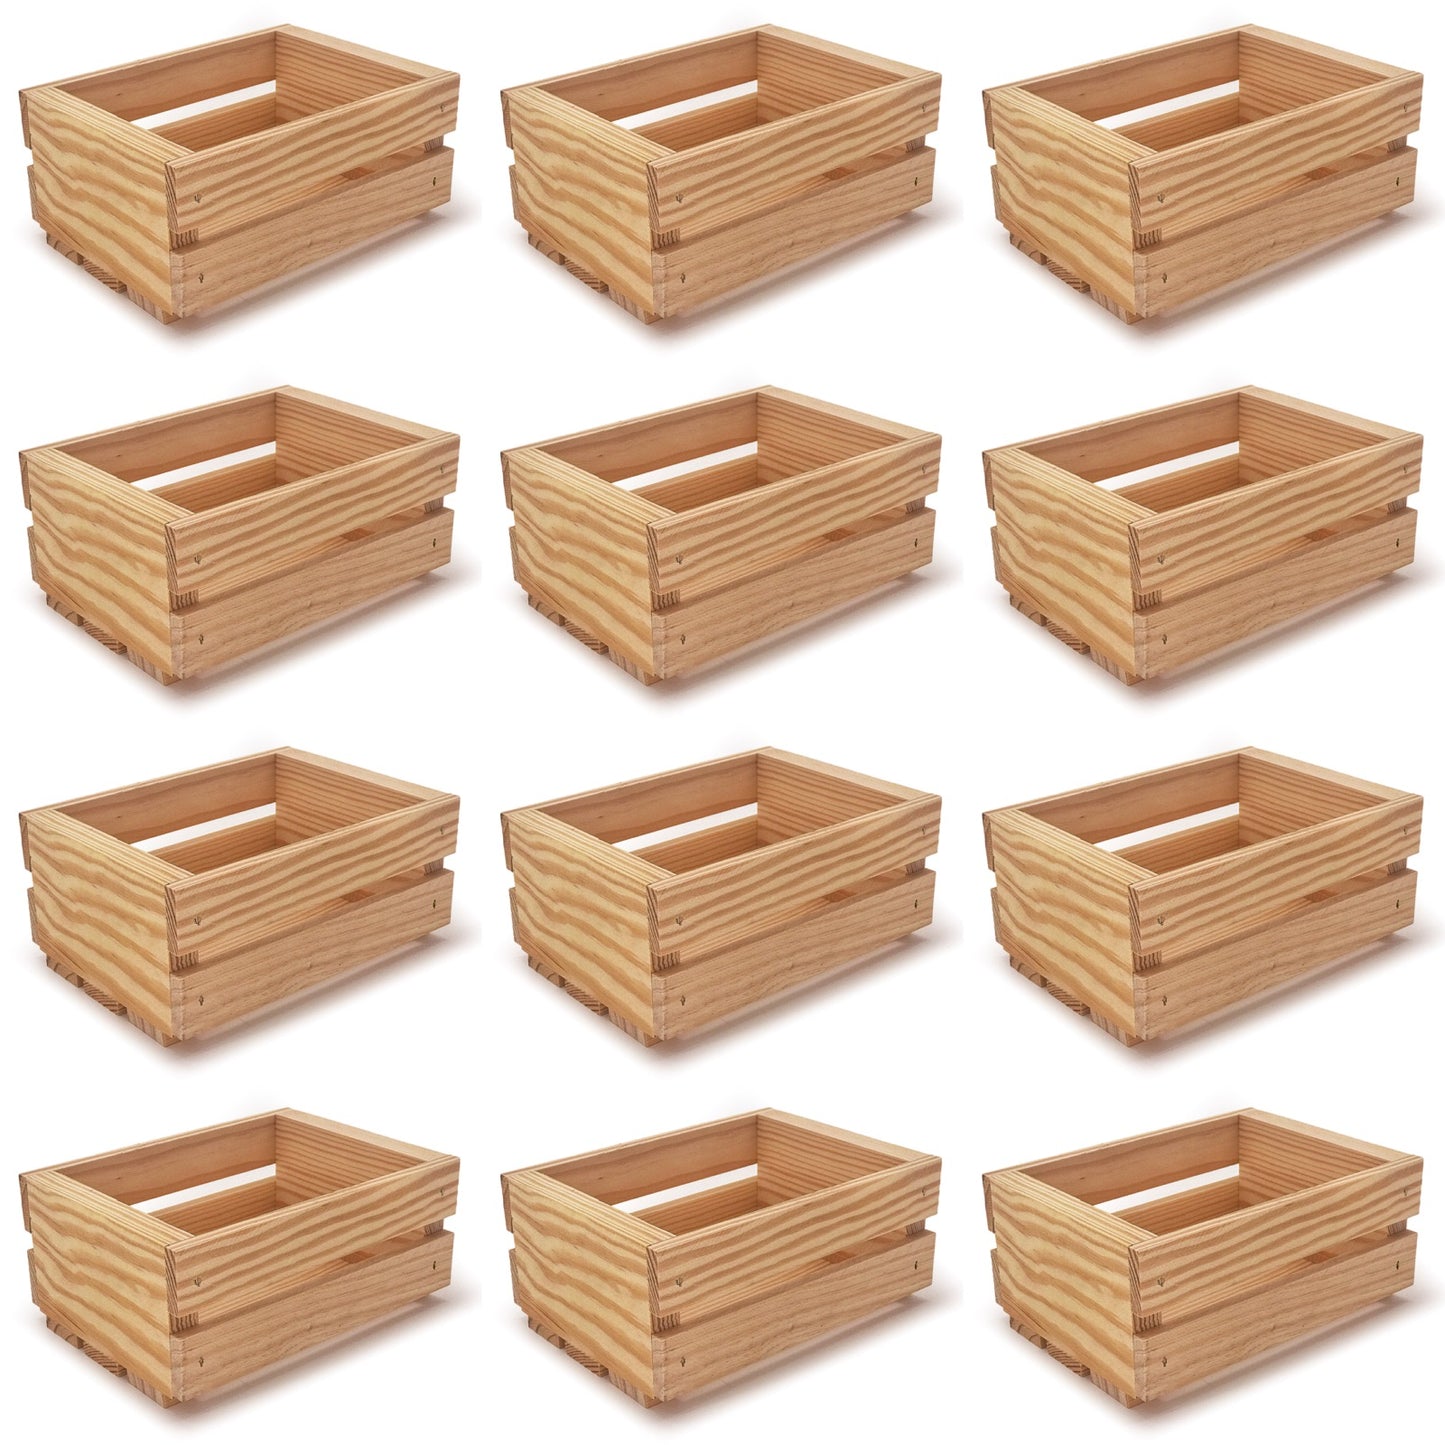 12 Small wooden crates 7.125x5.5x3.5